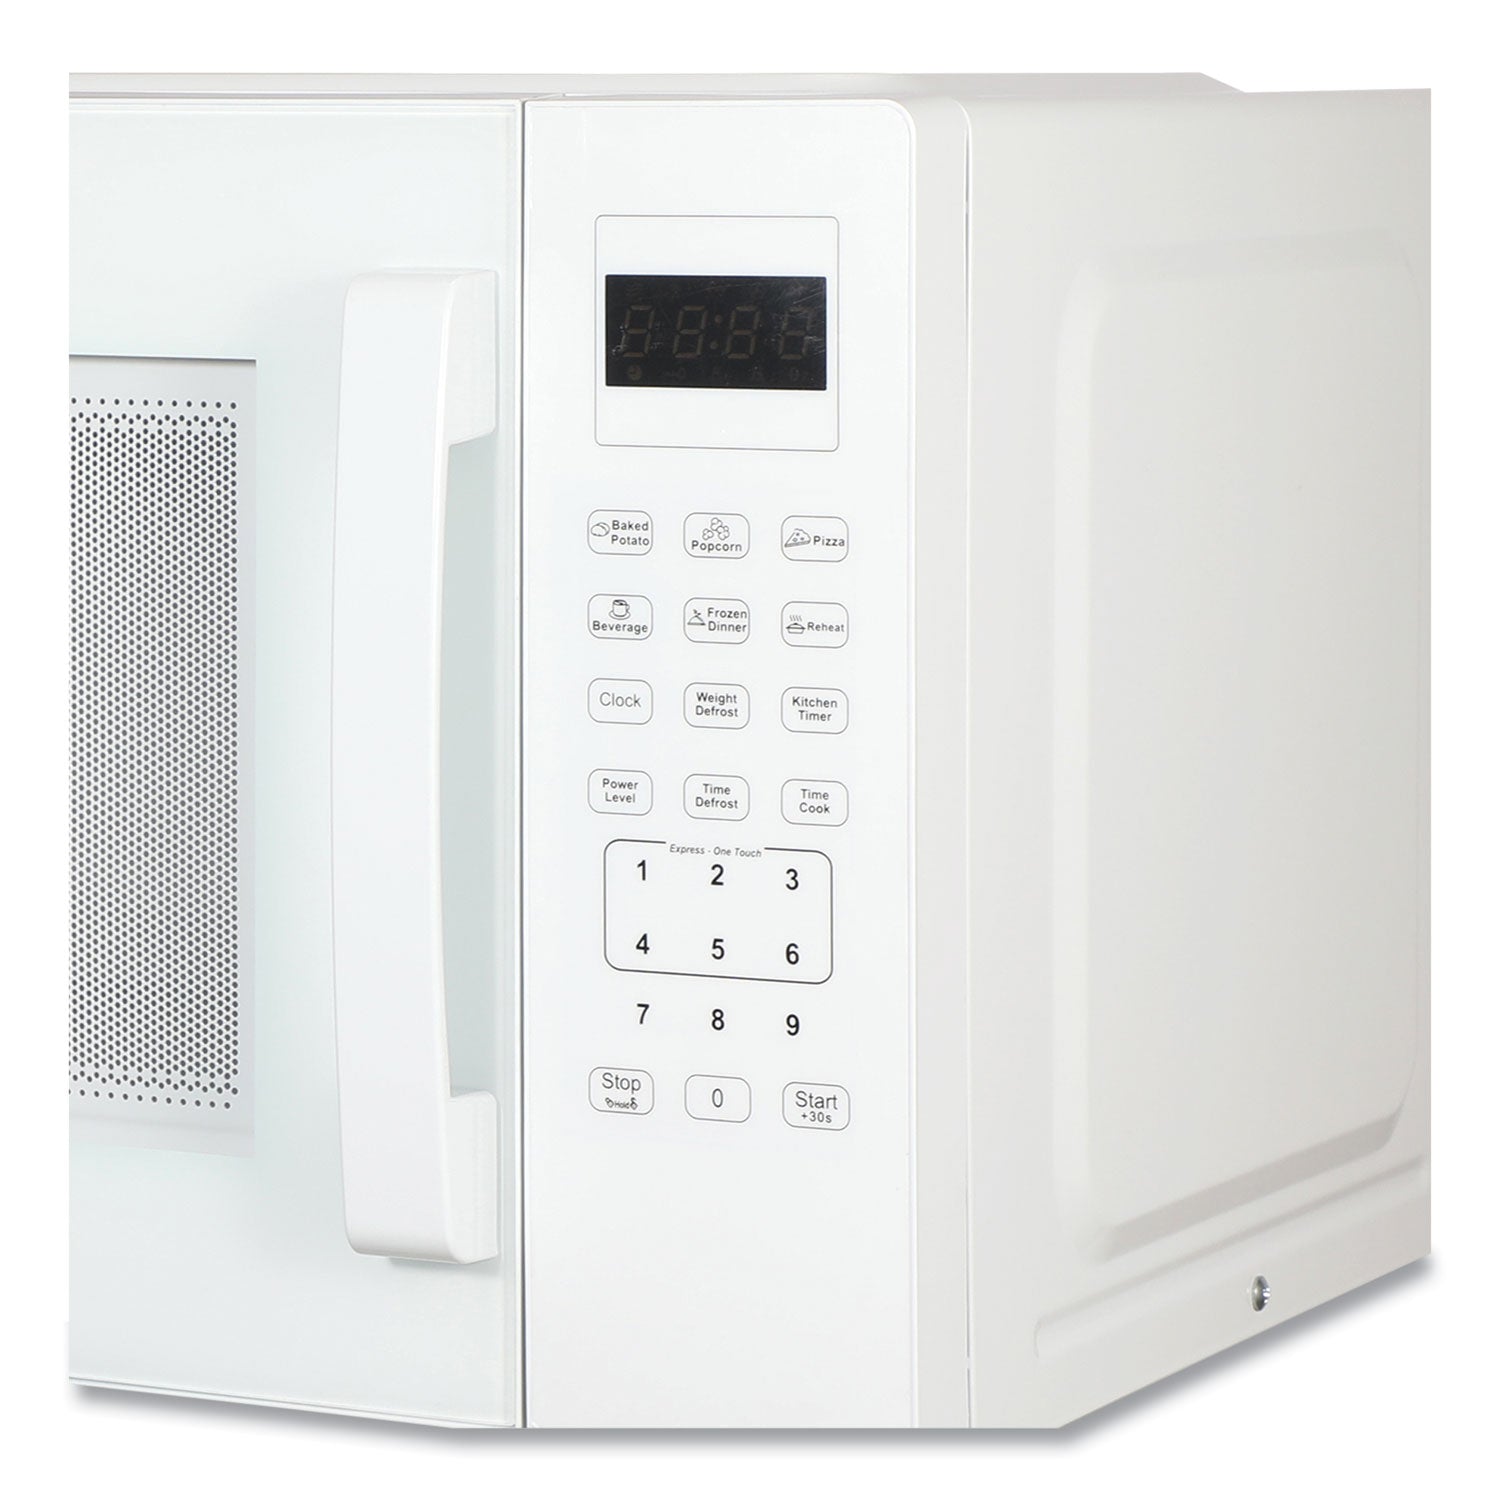 15-cu-ft-microwave-oven-1000-w-white_avamt150v0w - 4